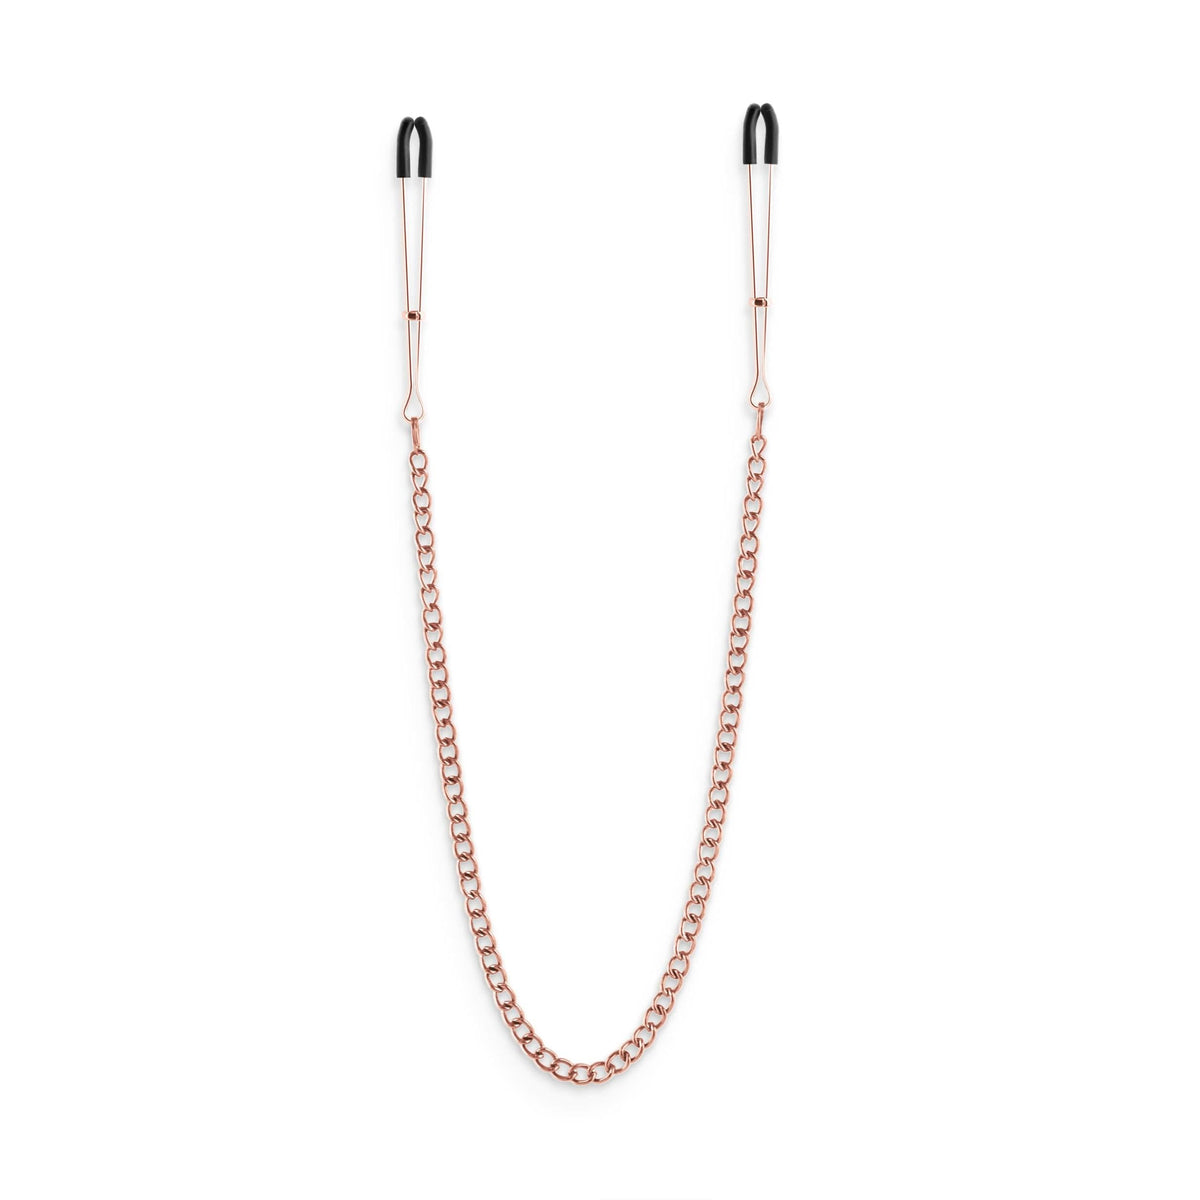 bound nipple clamps dc3 rose gold